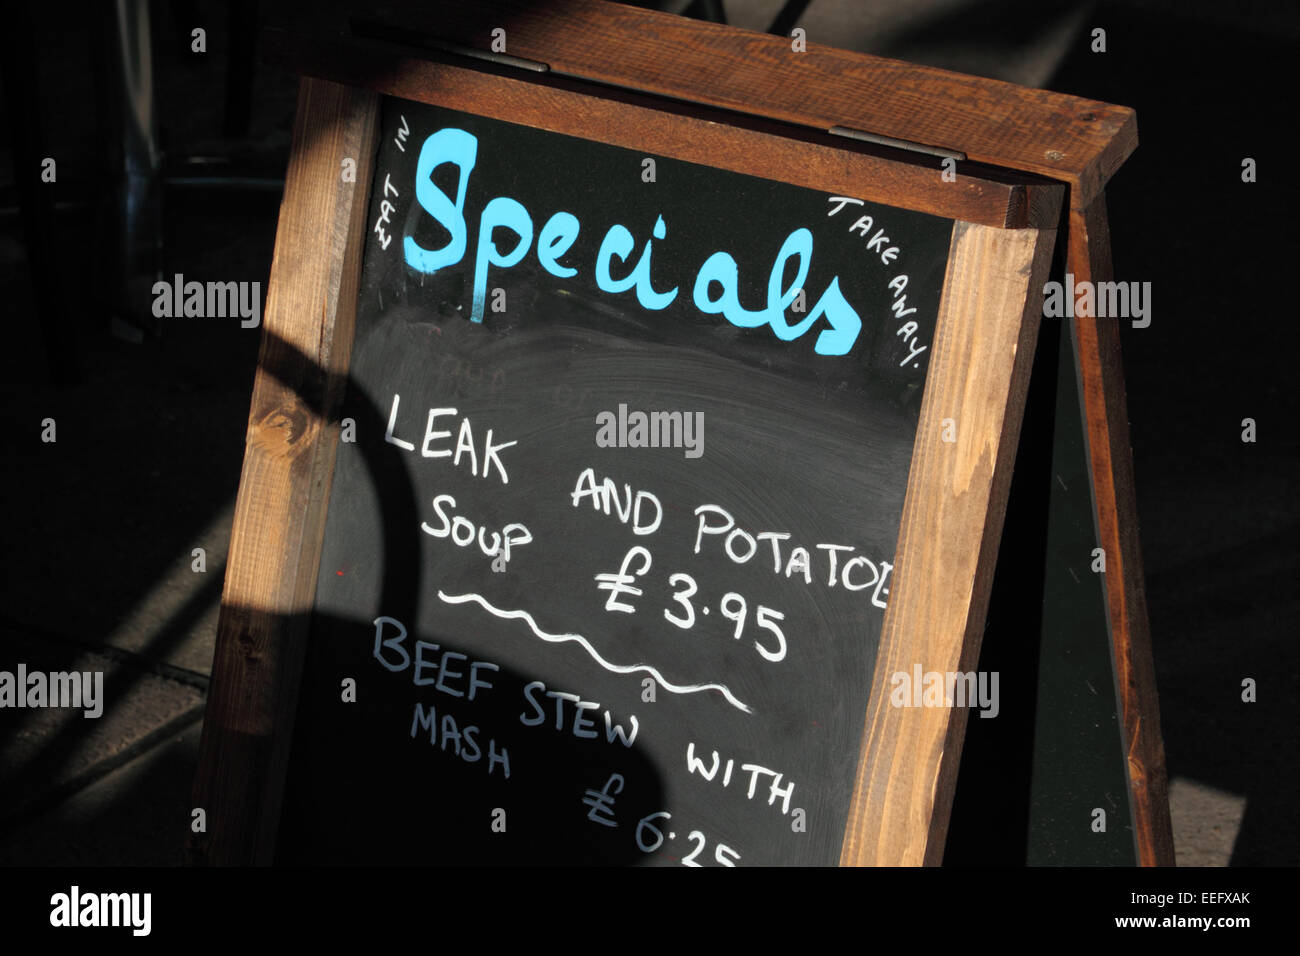 A notice outside a cafe with the word 'leek' misspelt as 'leak' Stock Photo